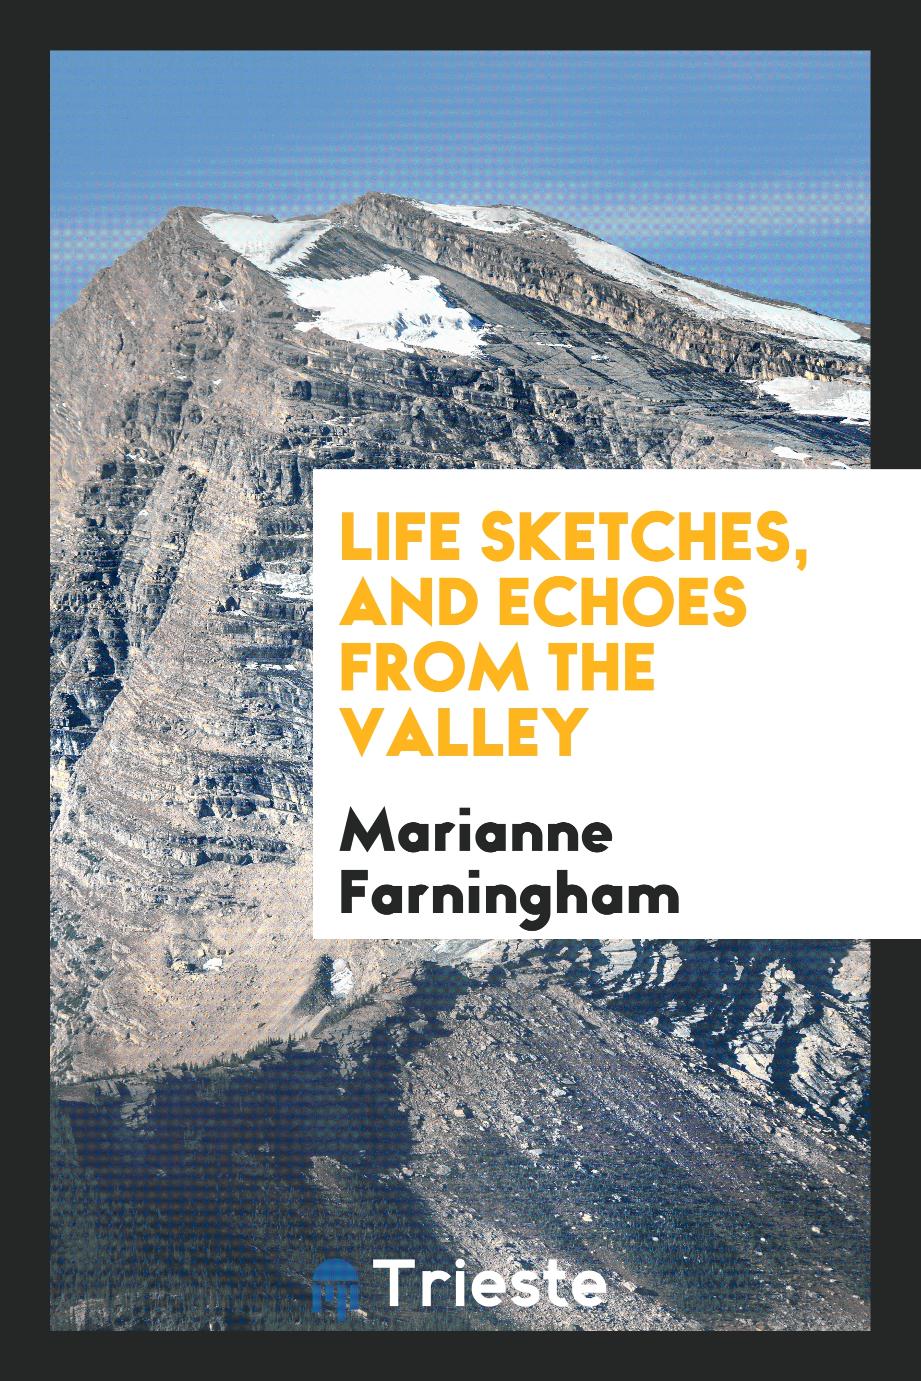 Life Sketches, and Echoes from the Valley